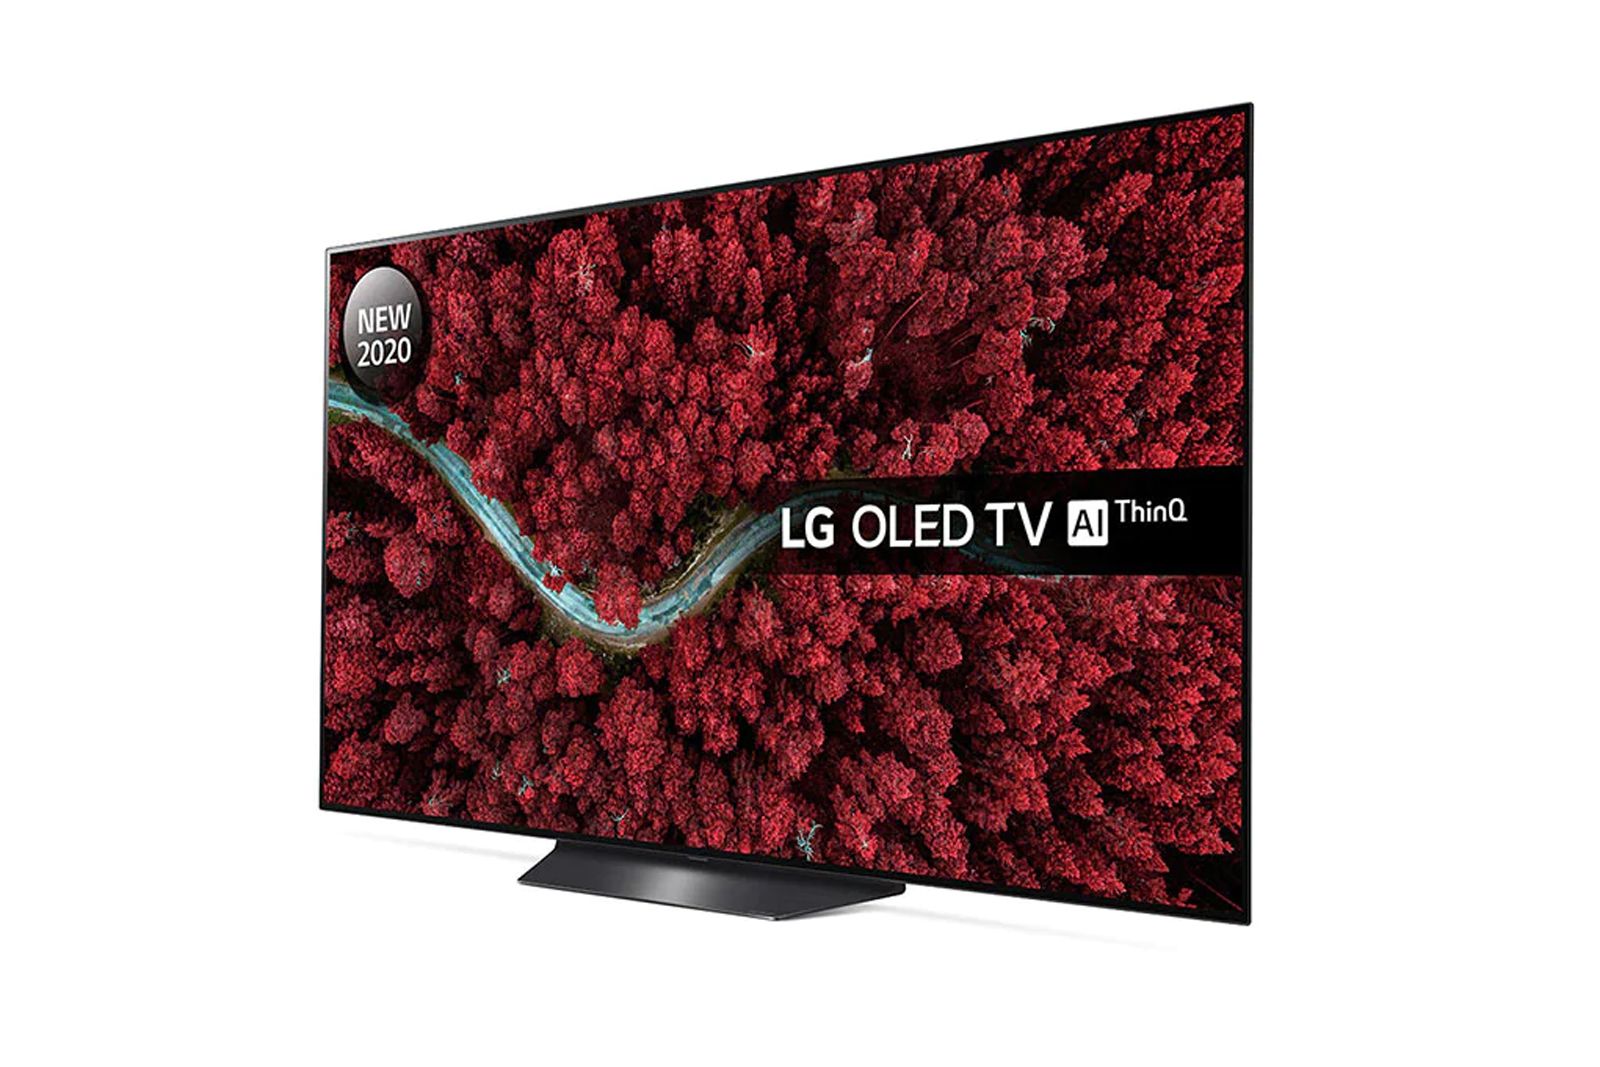 LG's entry-level 2020 OLED BX TV now available photo 1